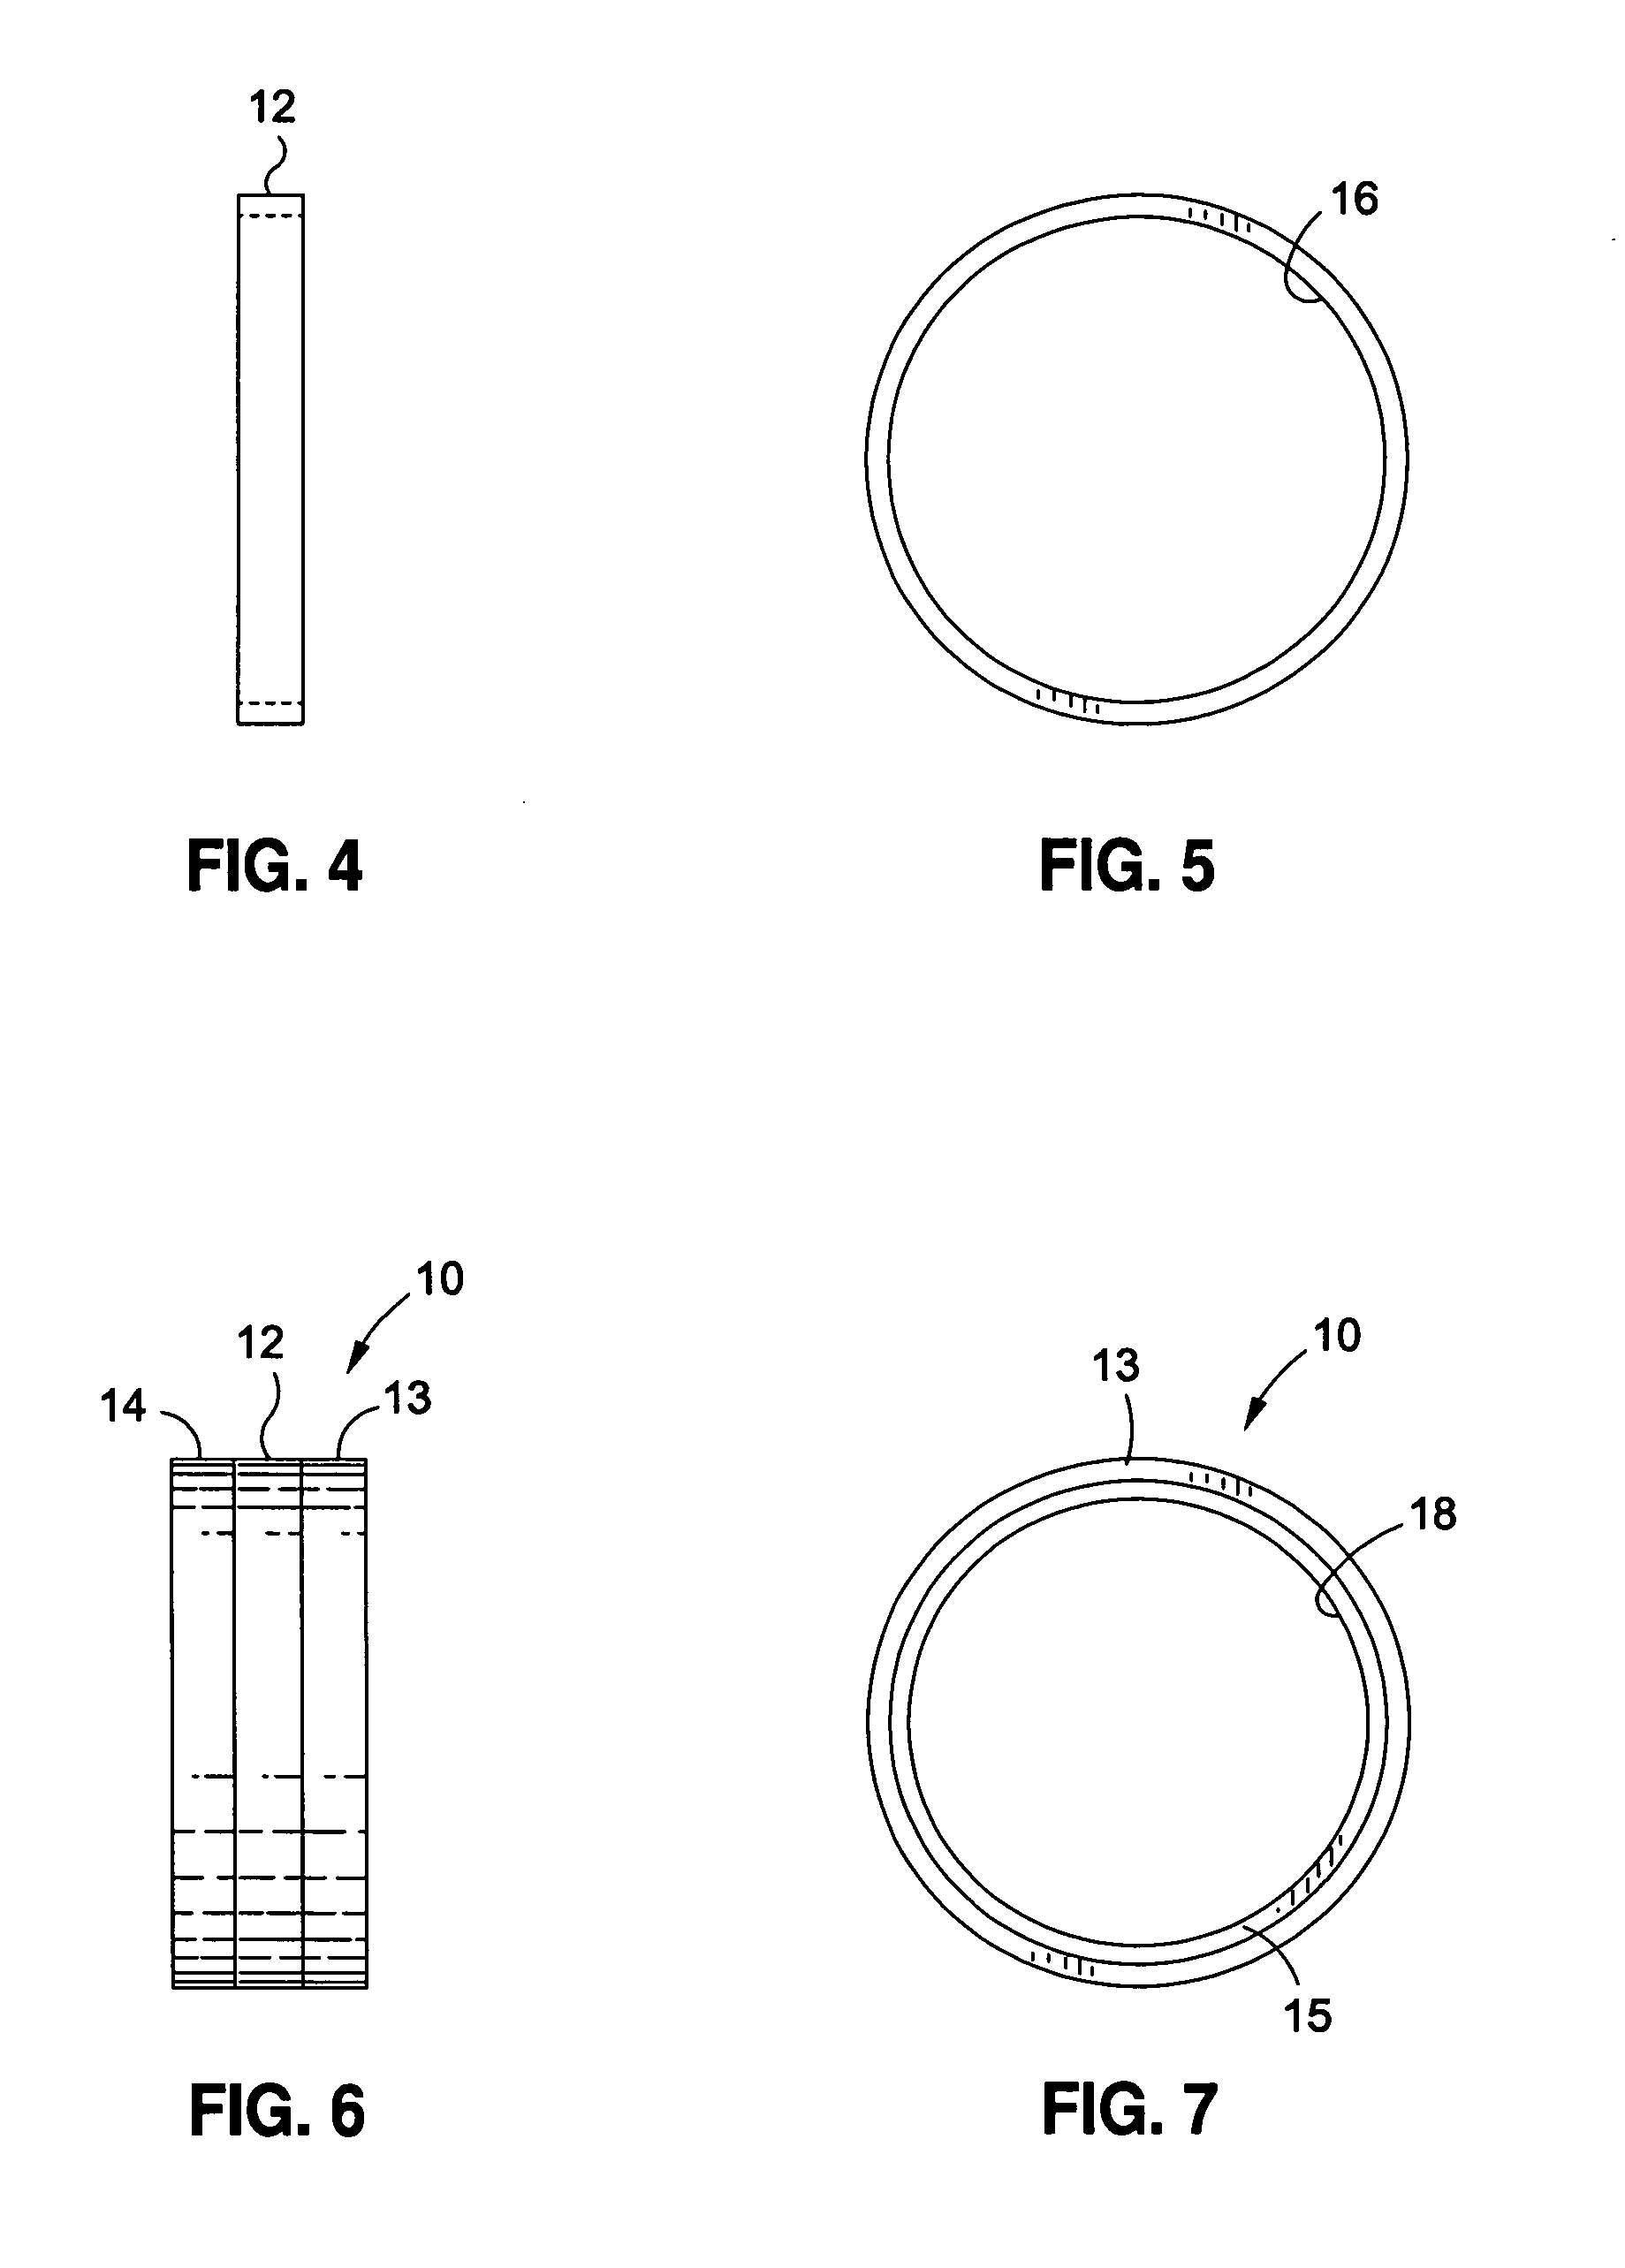 Method of manufacturing multi-element tungsten carbide jewelry rings